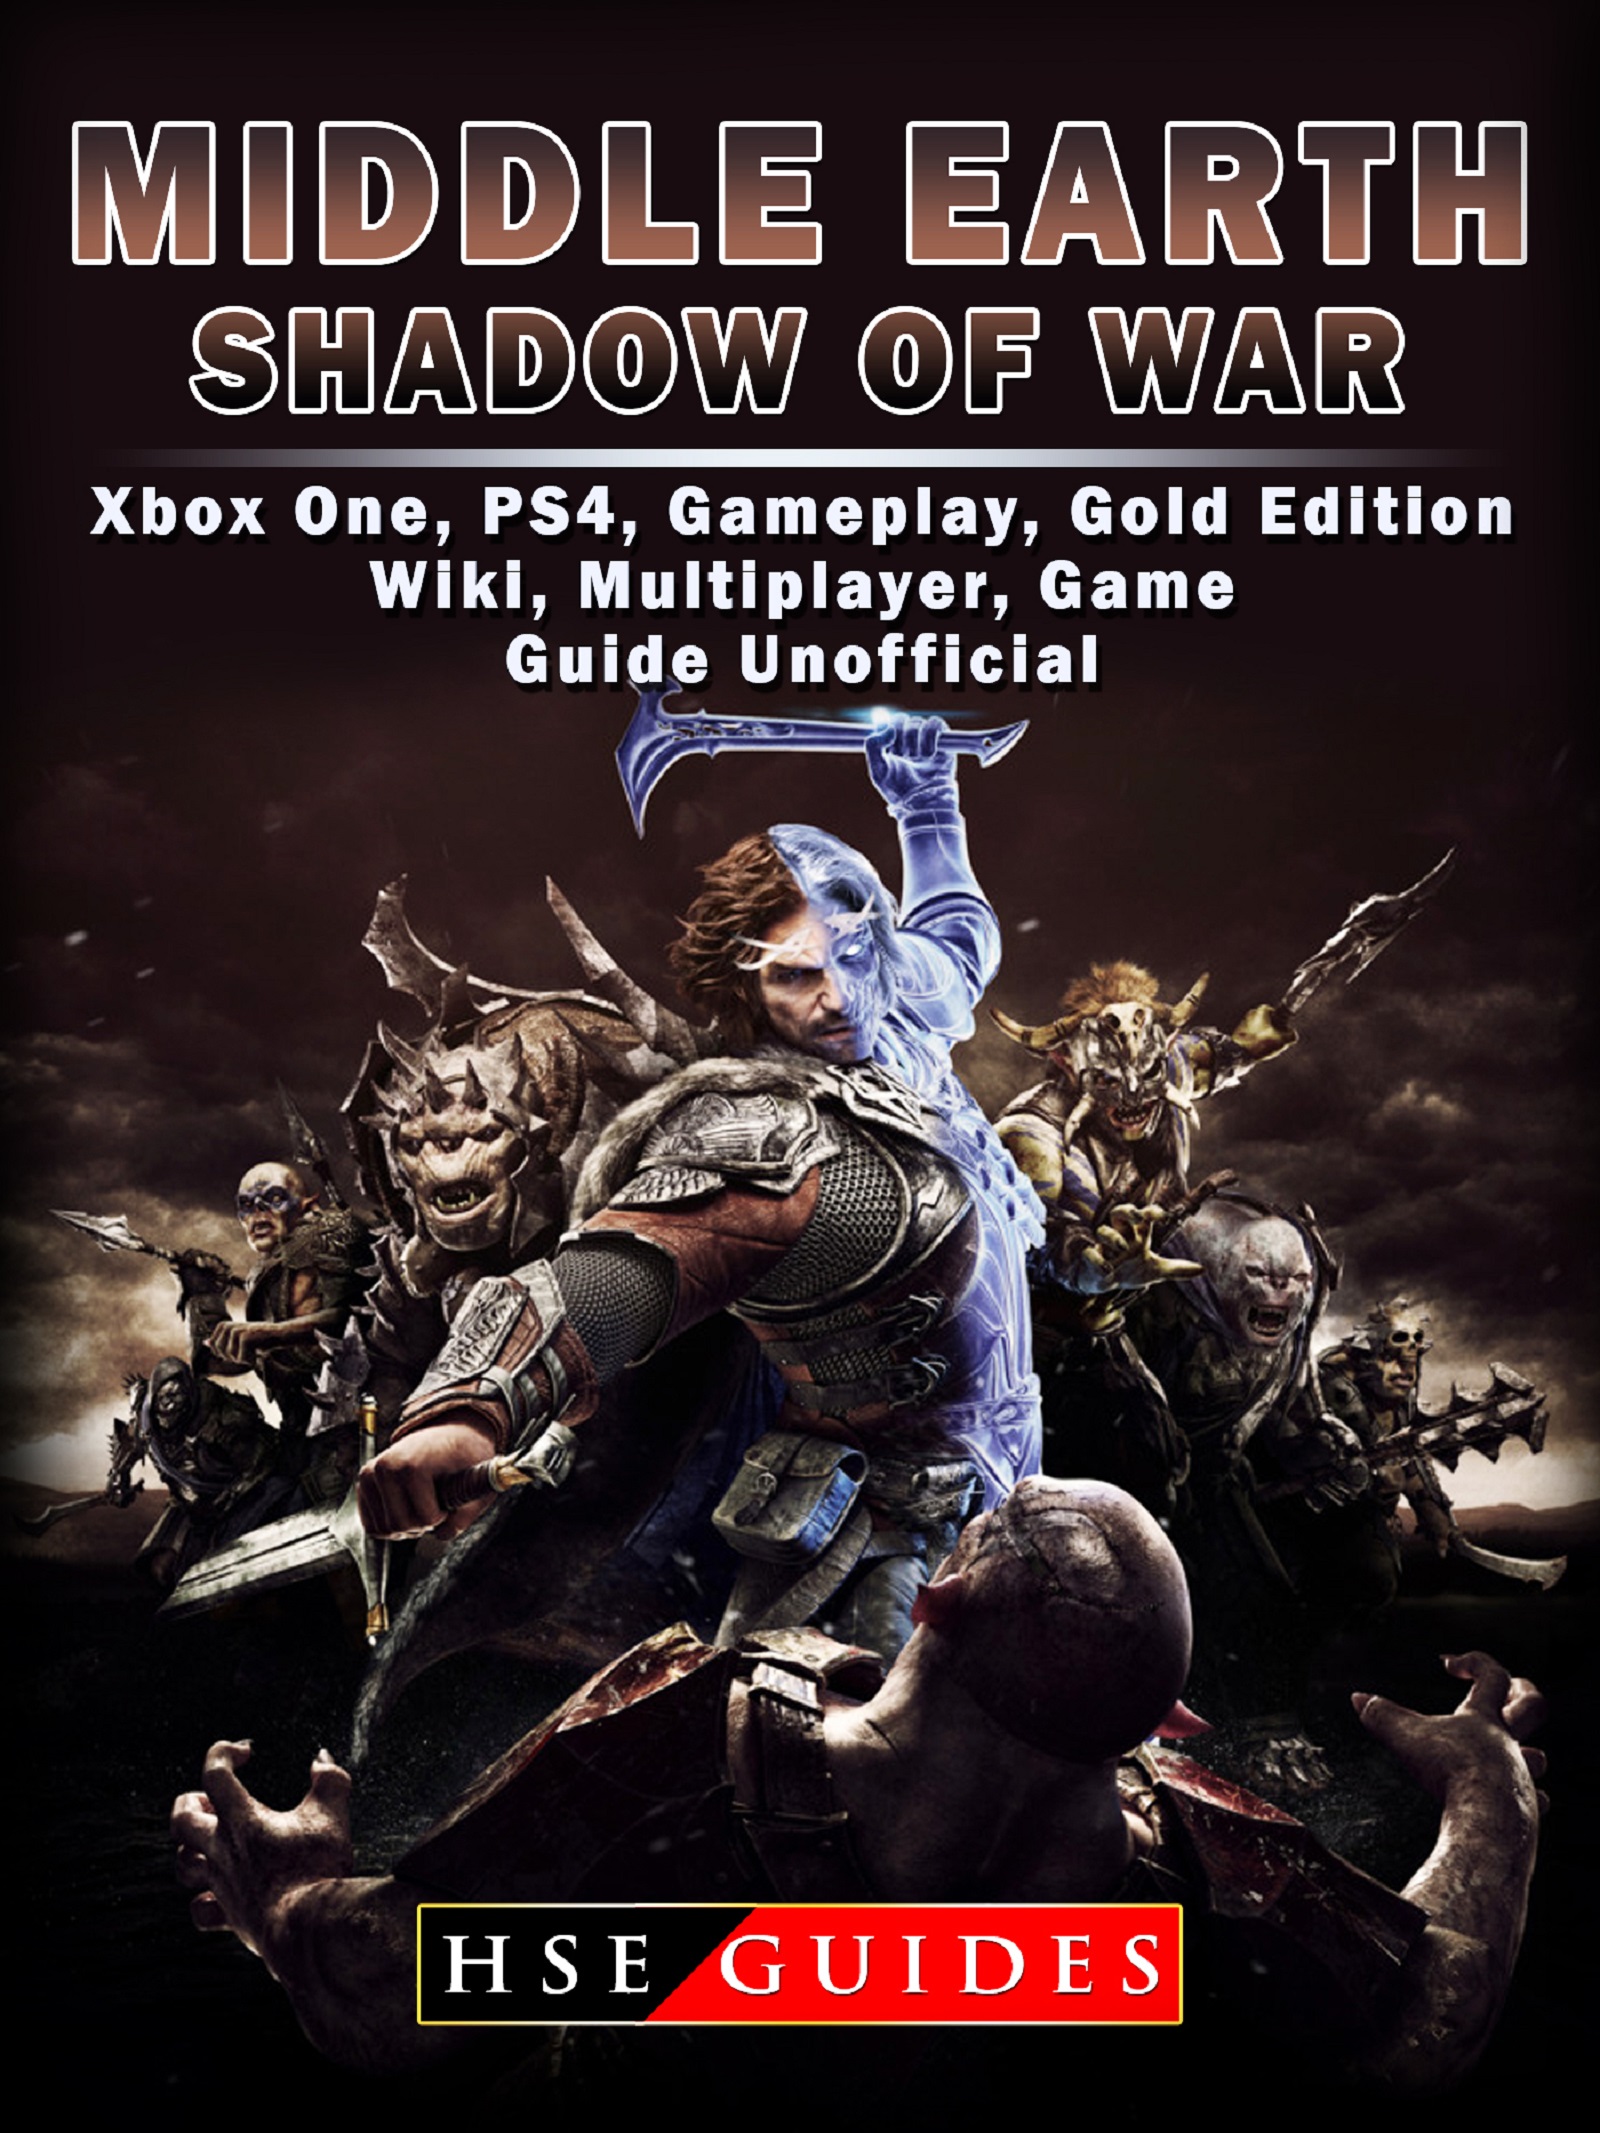 Middle Earth Shadow Of War Xbox One Ps4 Gameplay Gold Edition Wiki Multiplayer Game Guide Unofficial